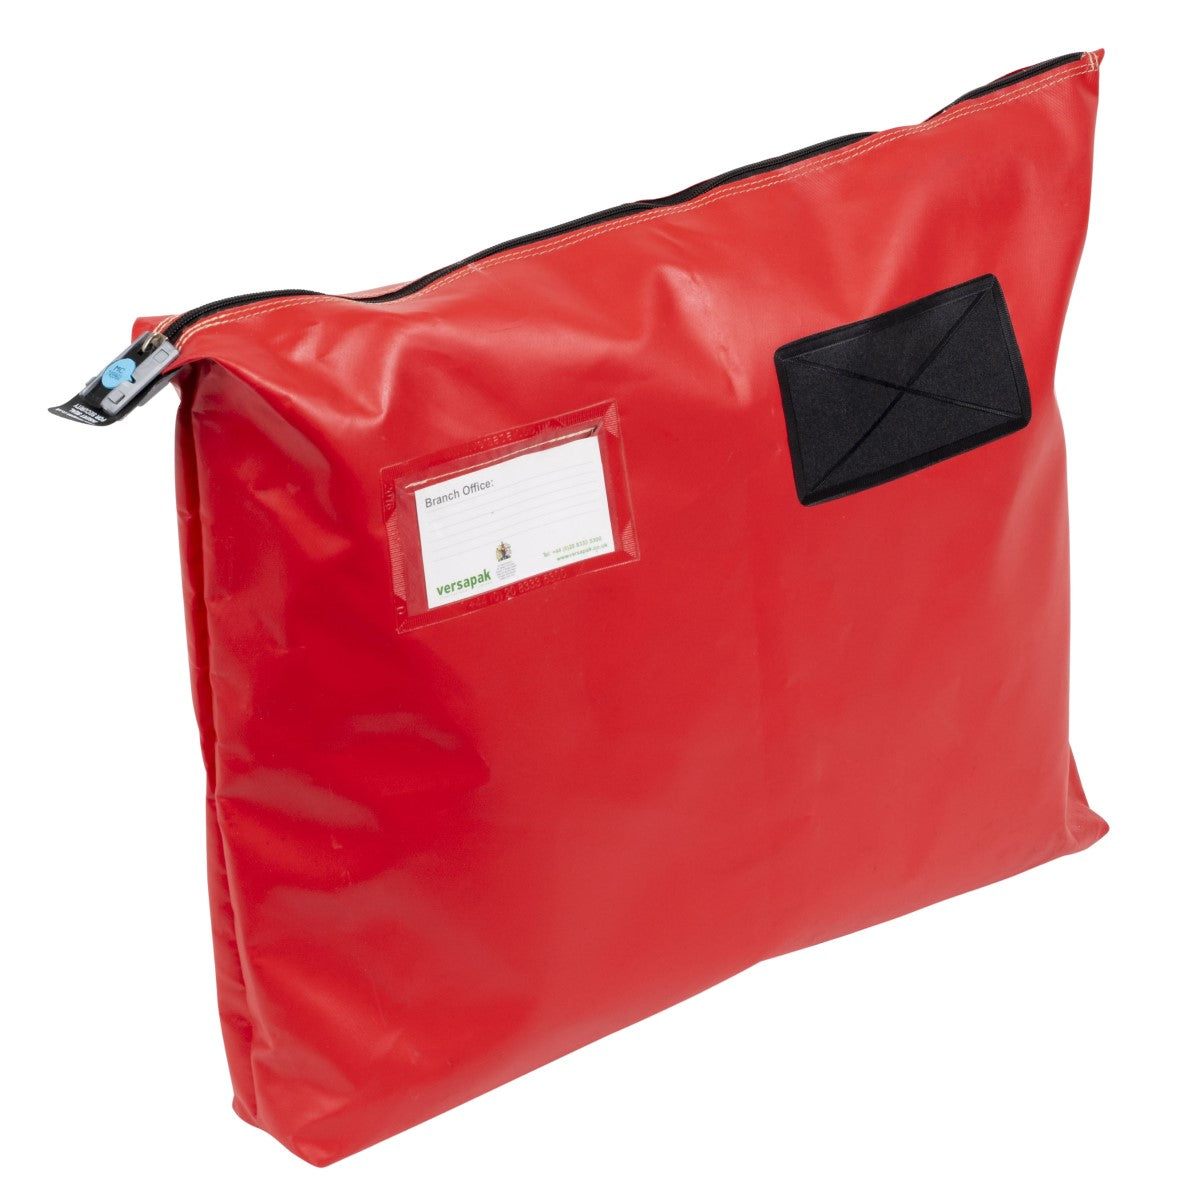 Versapak Single Seam Mail Pouch with Gusset CG6 Button Red